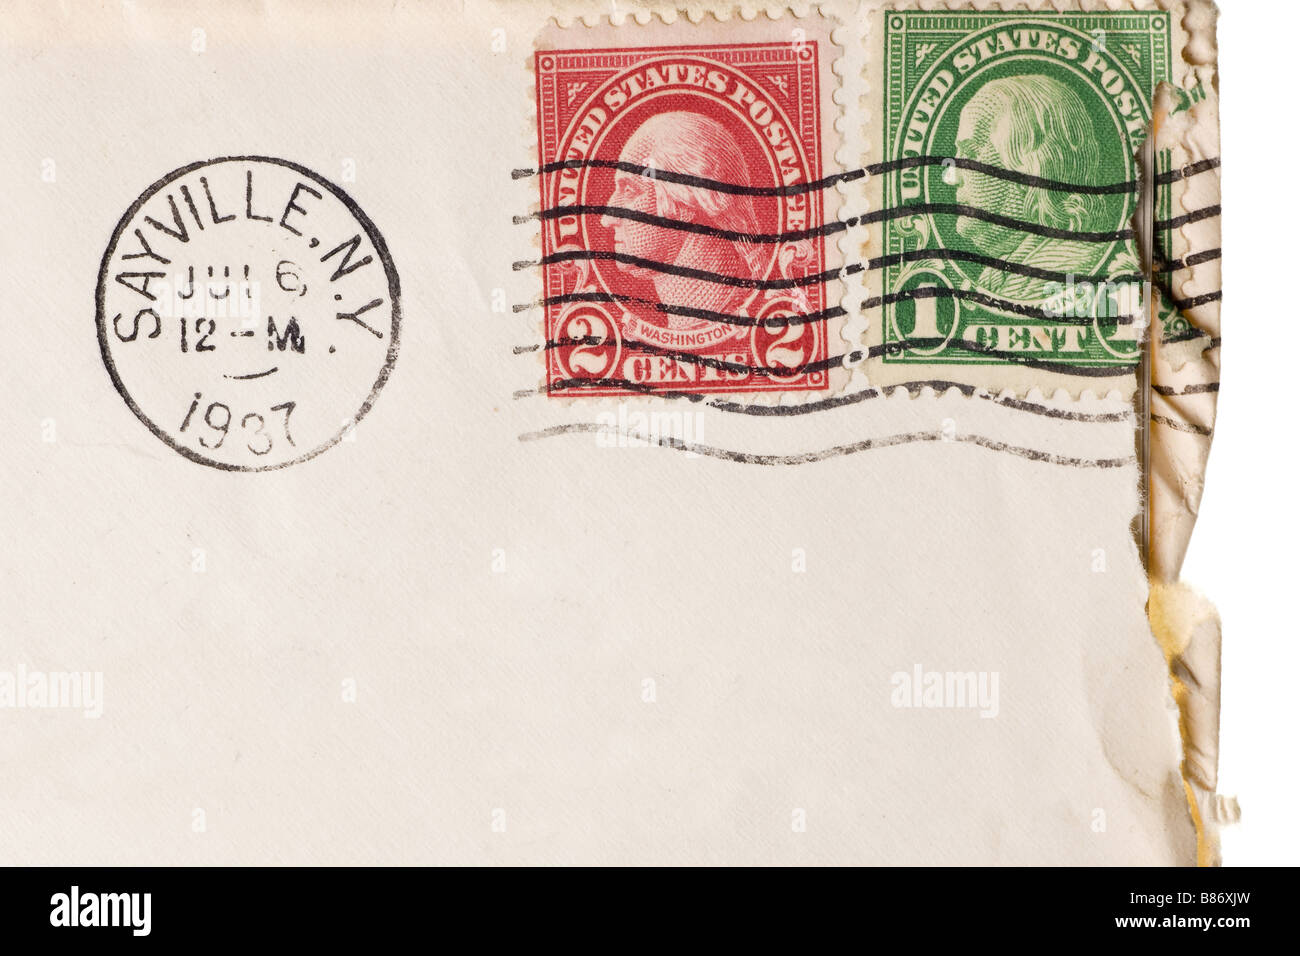 Vintage yellowed envelope with postmark stamp Stock Photo